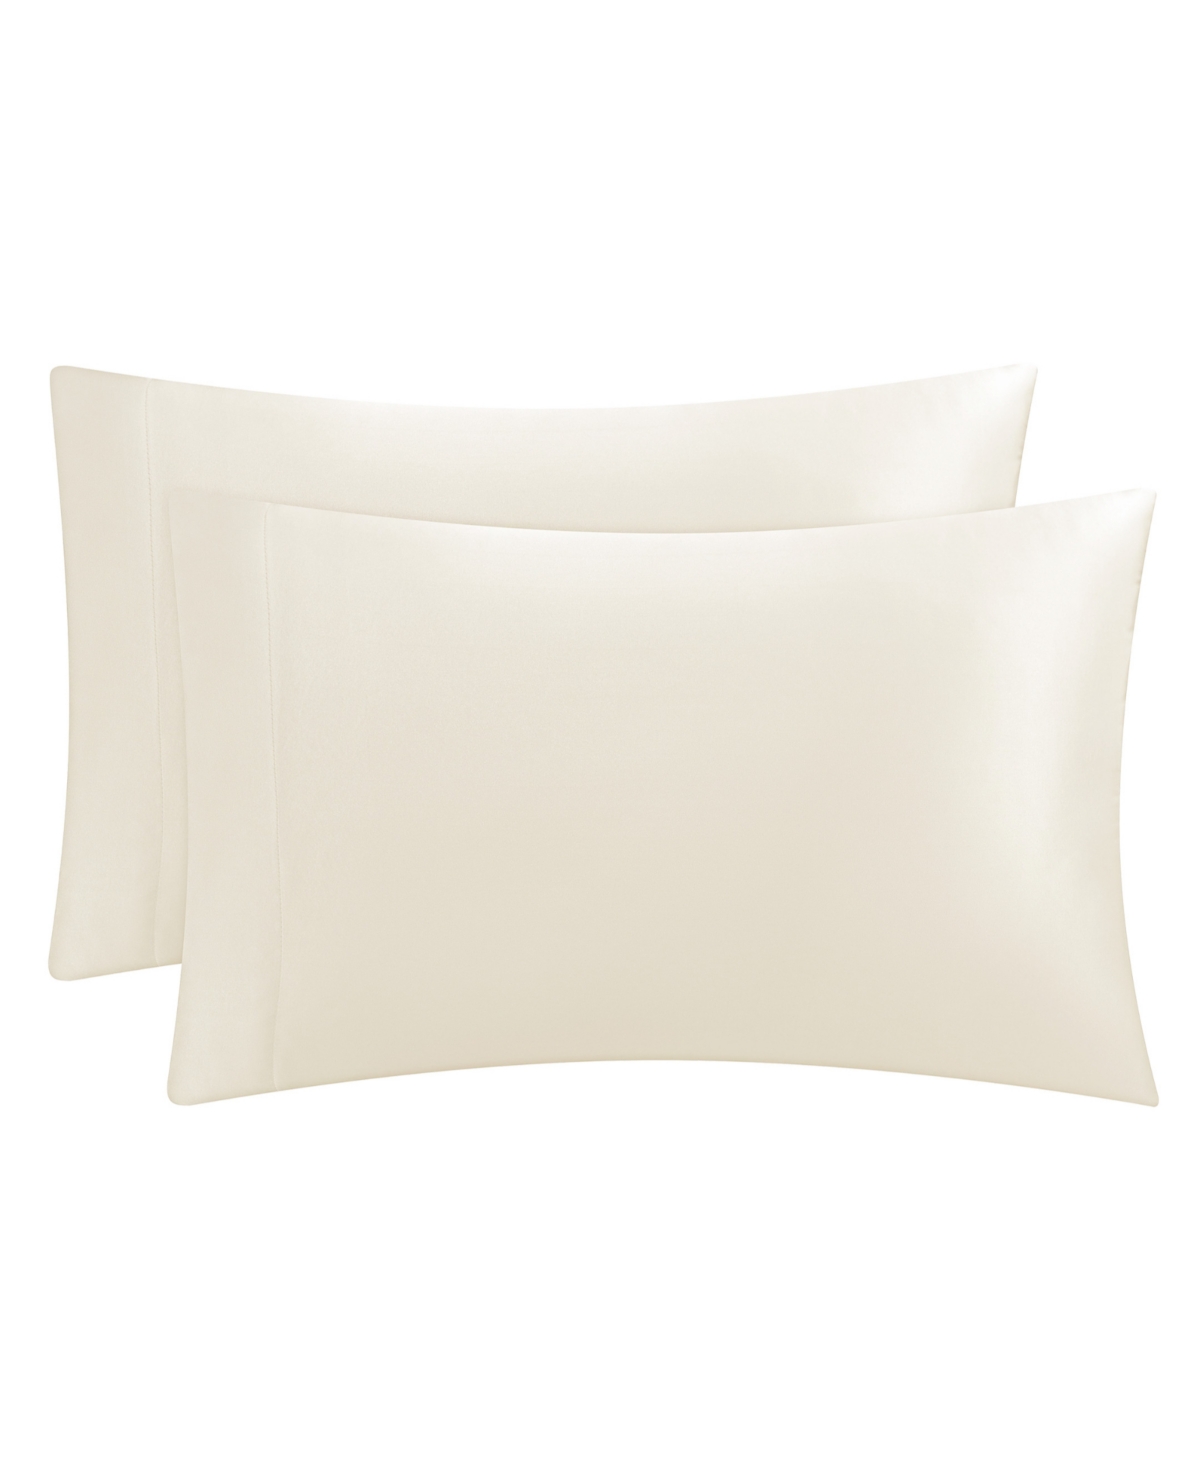 Juicy Couture Satin 2 Piece Pillow Case Set, Standard In Ivory